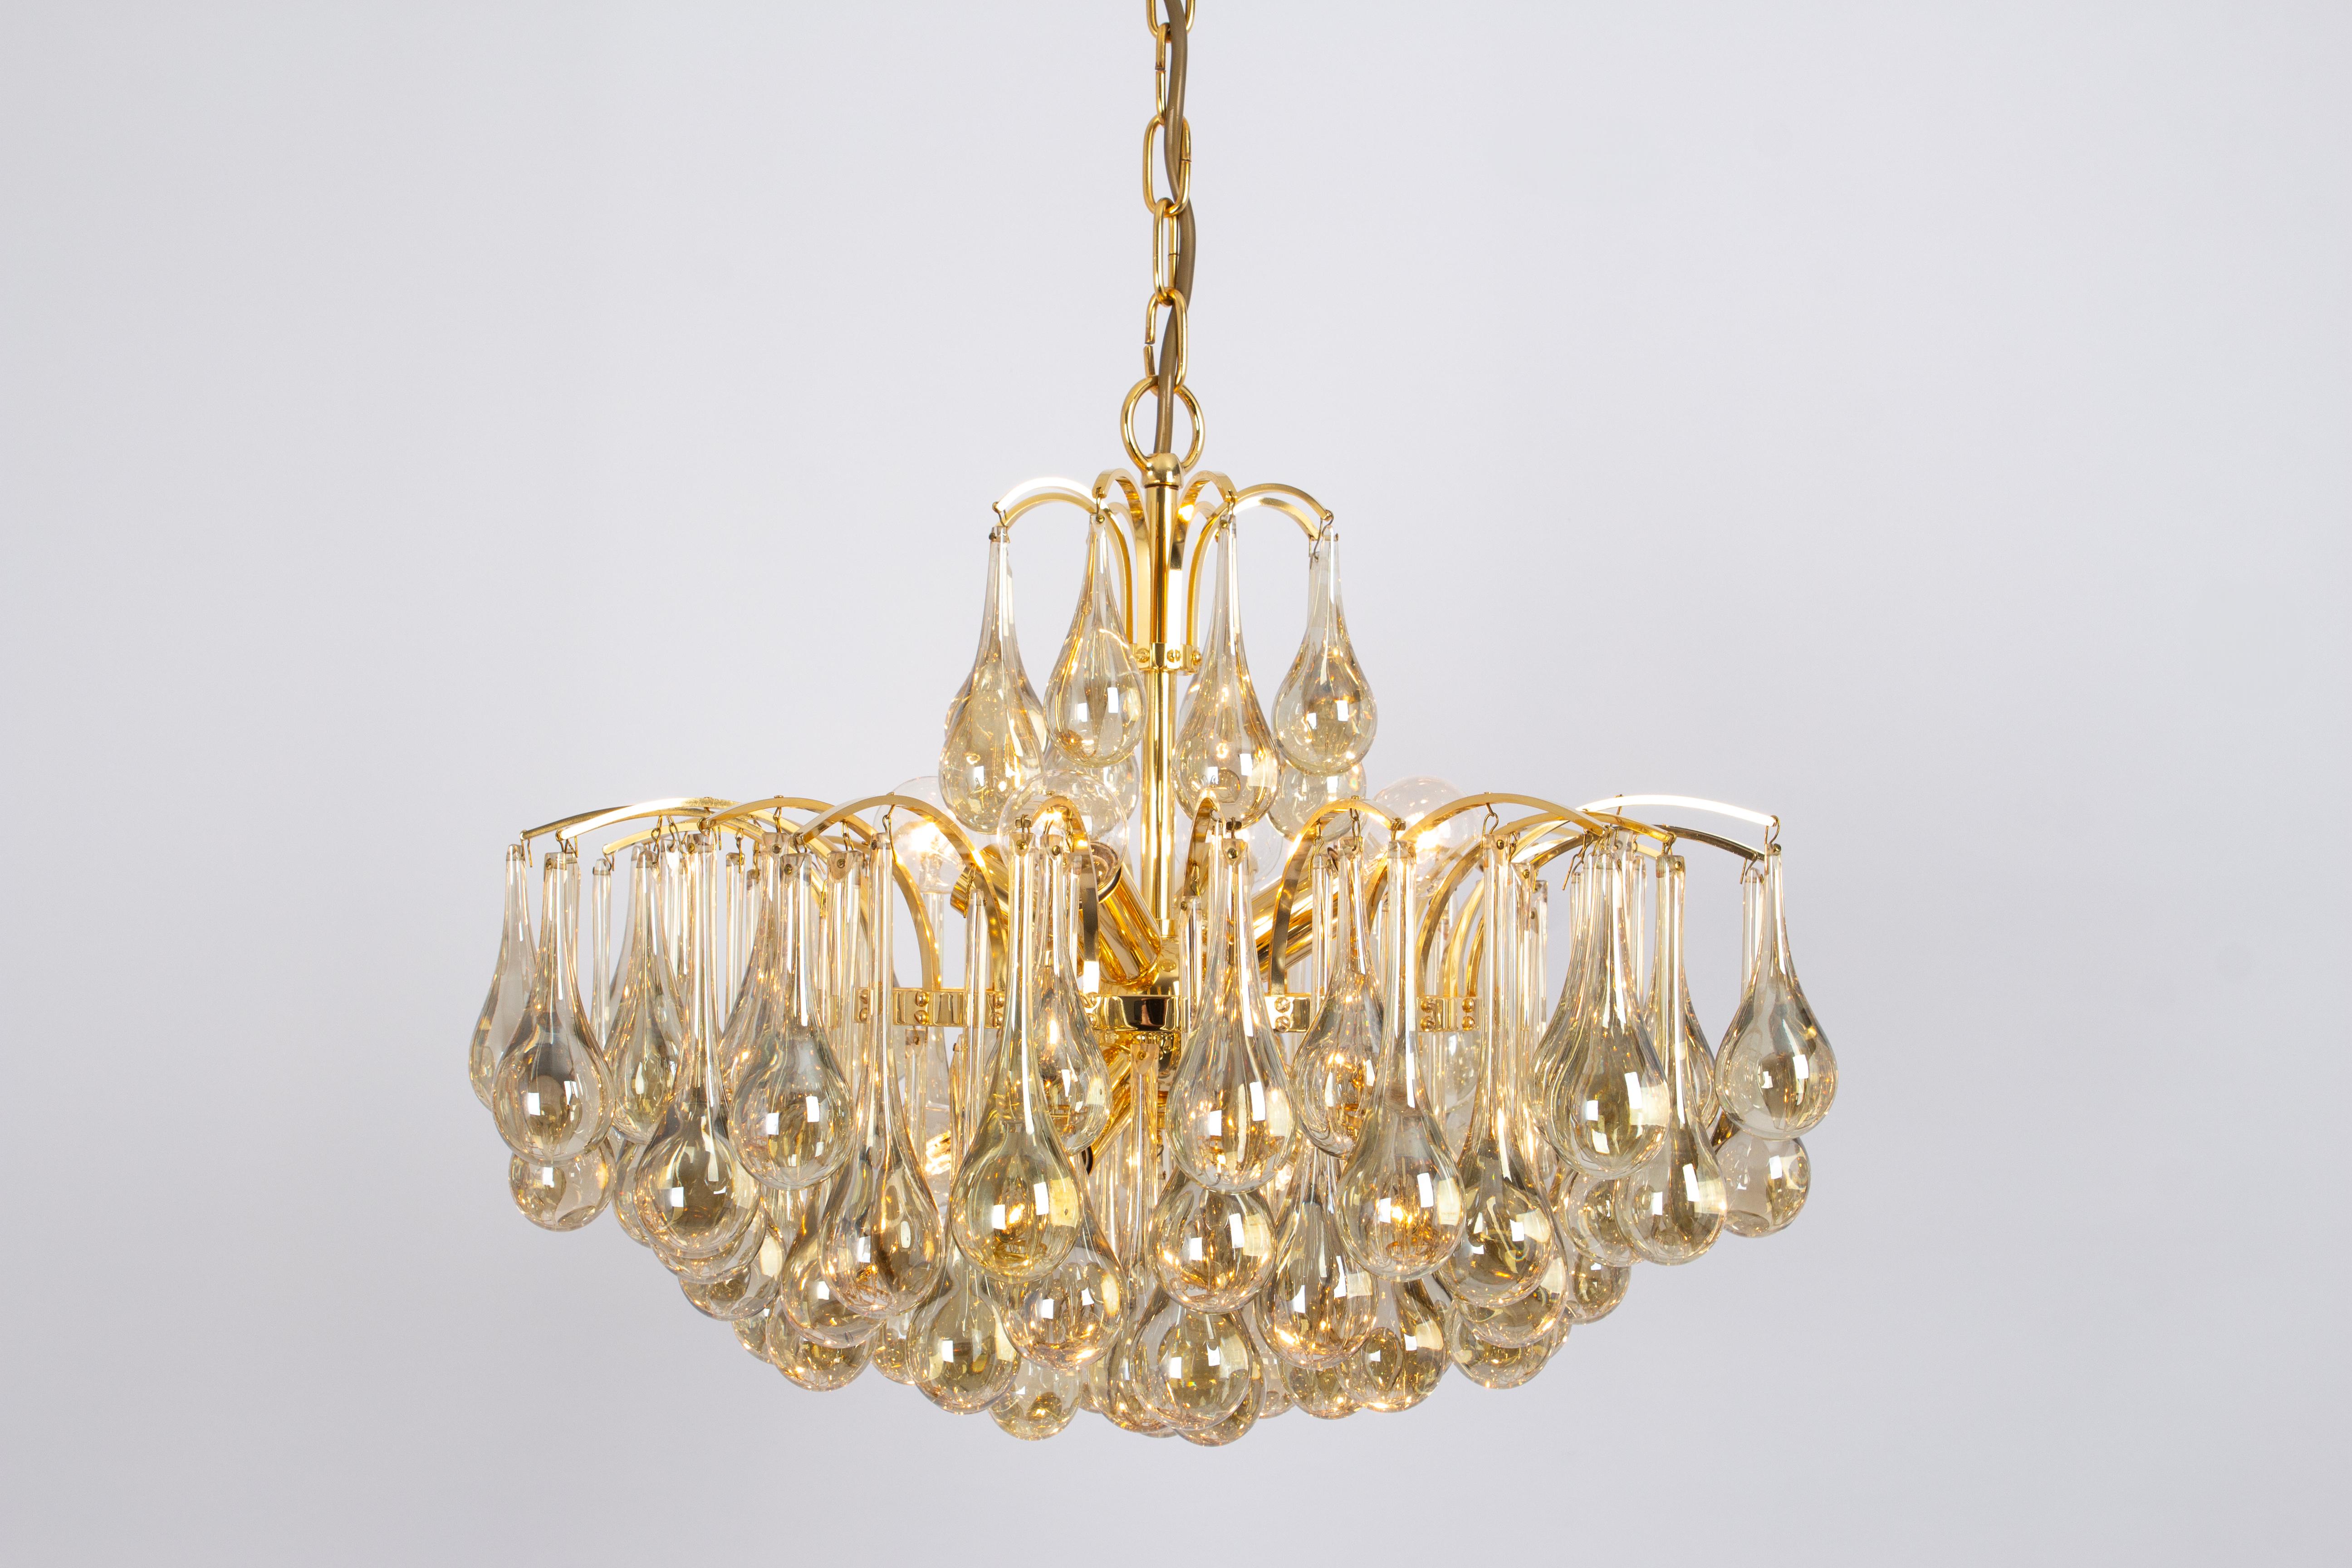 Stunning chandeliers by Christoph Palme, Germany, manufactured in the 1970s. It’s composed of Murano teardrop glass pieces on a gilded brass frame.

High quality and in very good condition. Cleaned, well-wired, and ready to use. 

The fixture